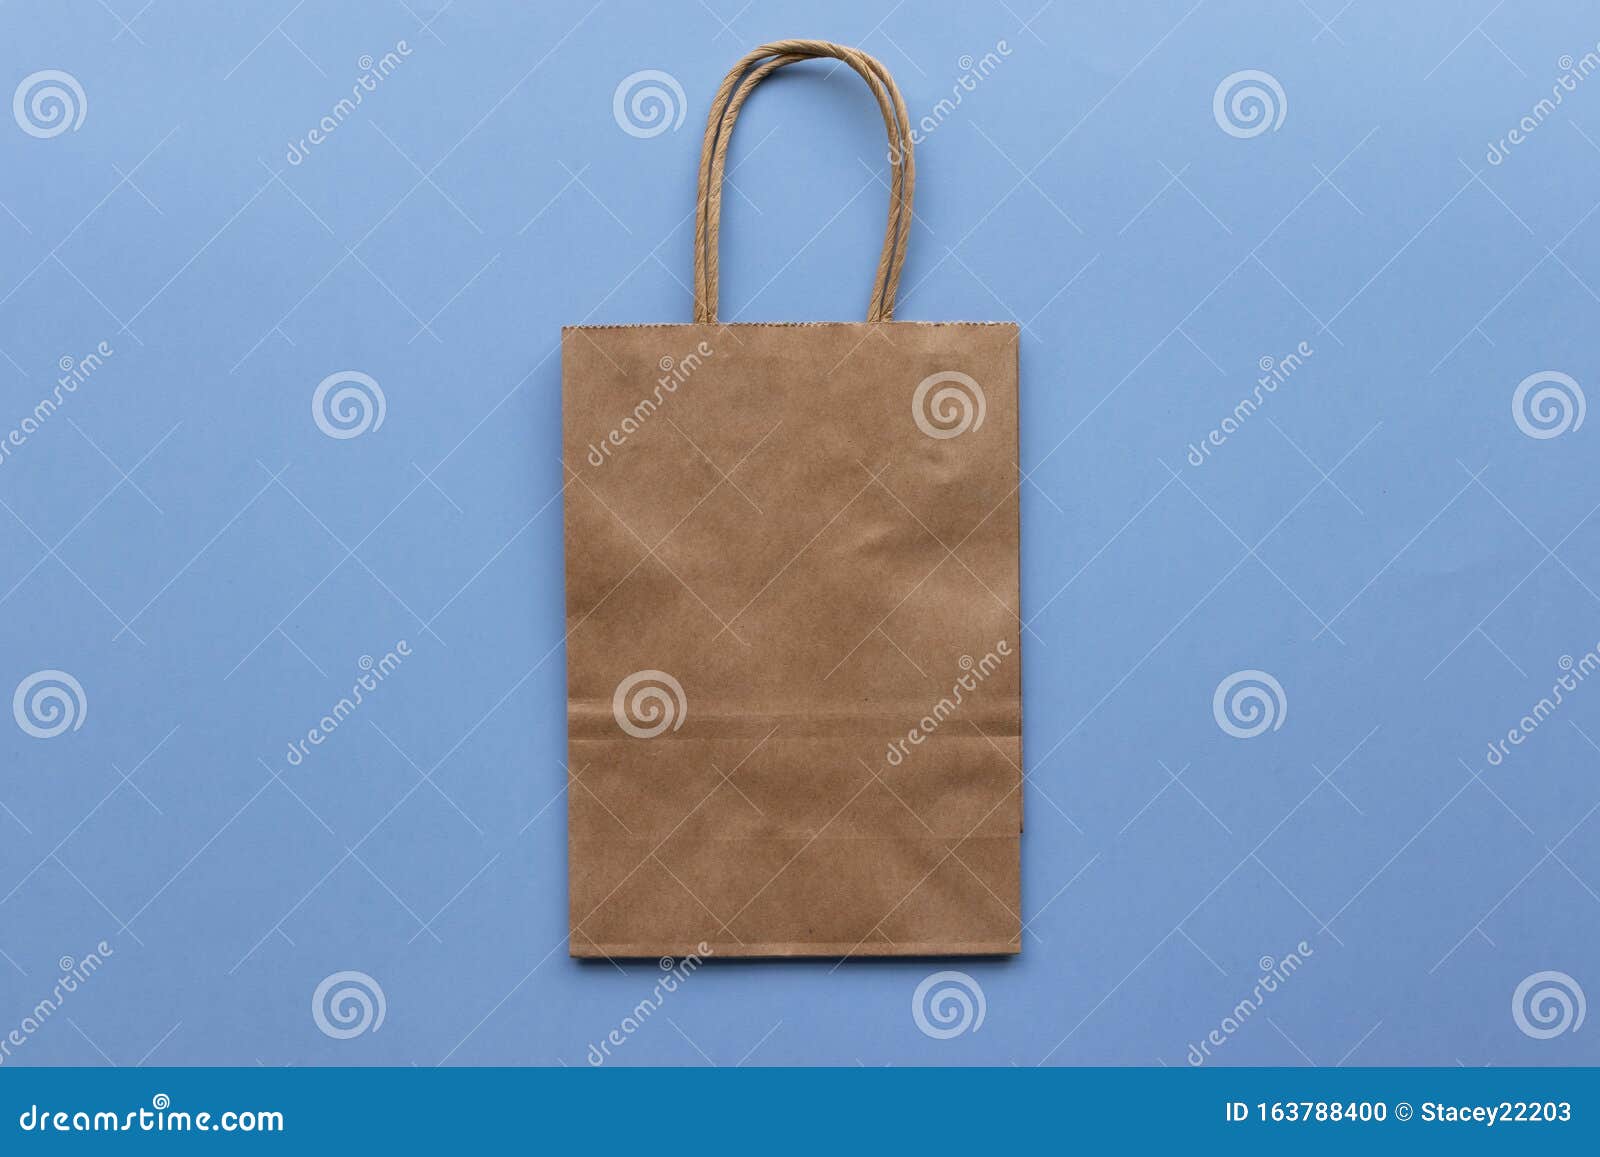 Download Plain Blank Brown Paper Bag On A Blue Background, Empty ...